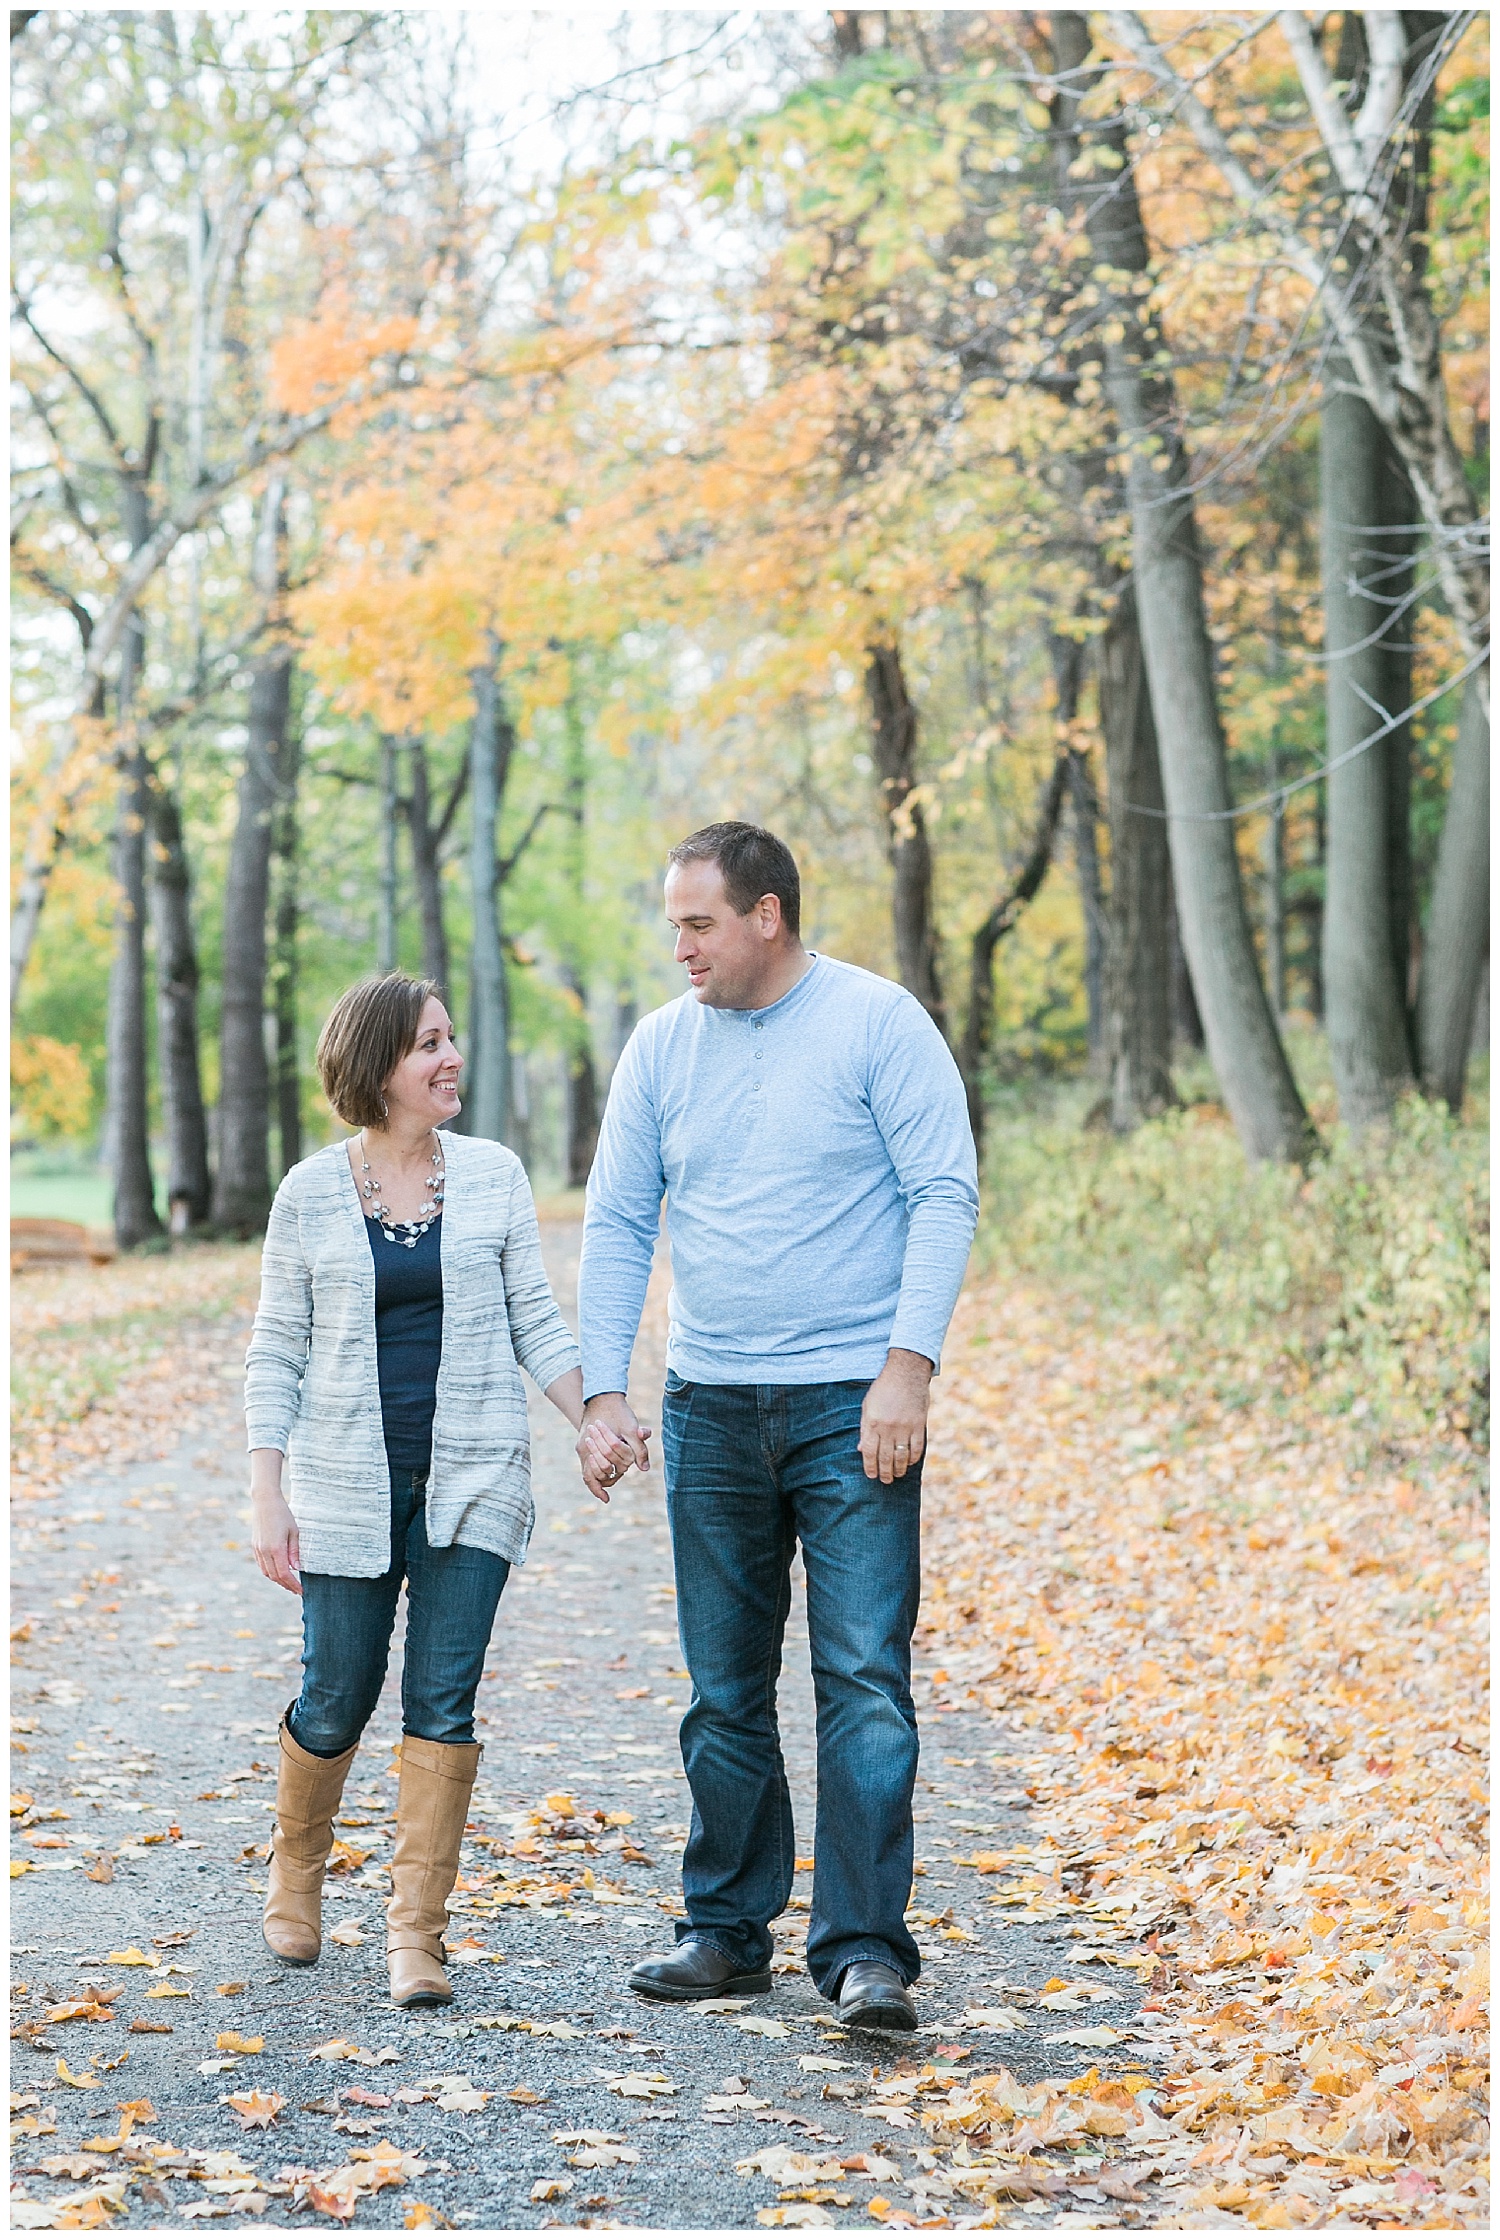 The Schurr family session at Letchworth state park - Whimsy roots photography 23.jpg